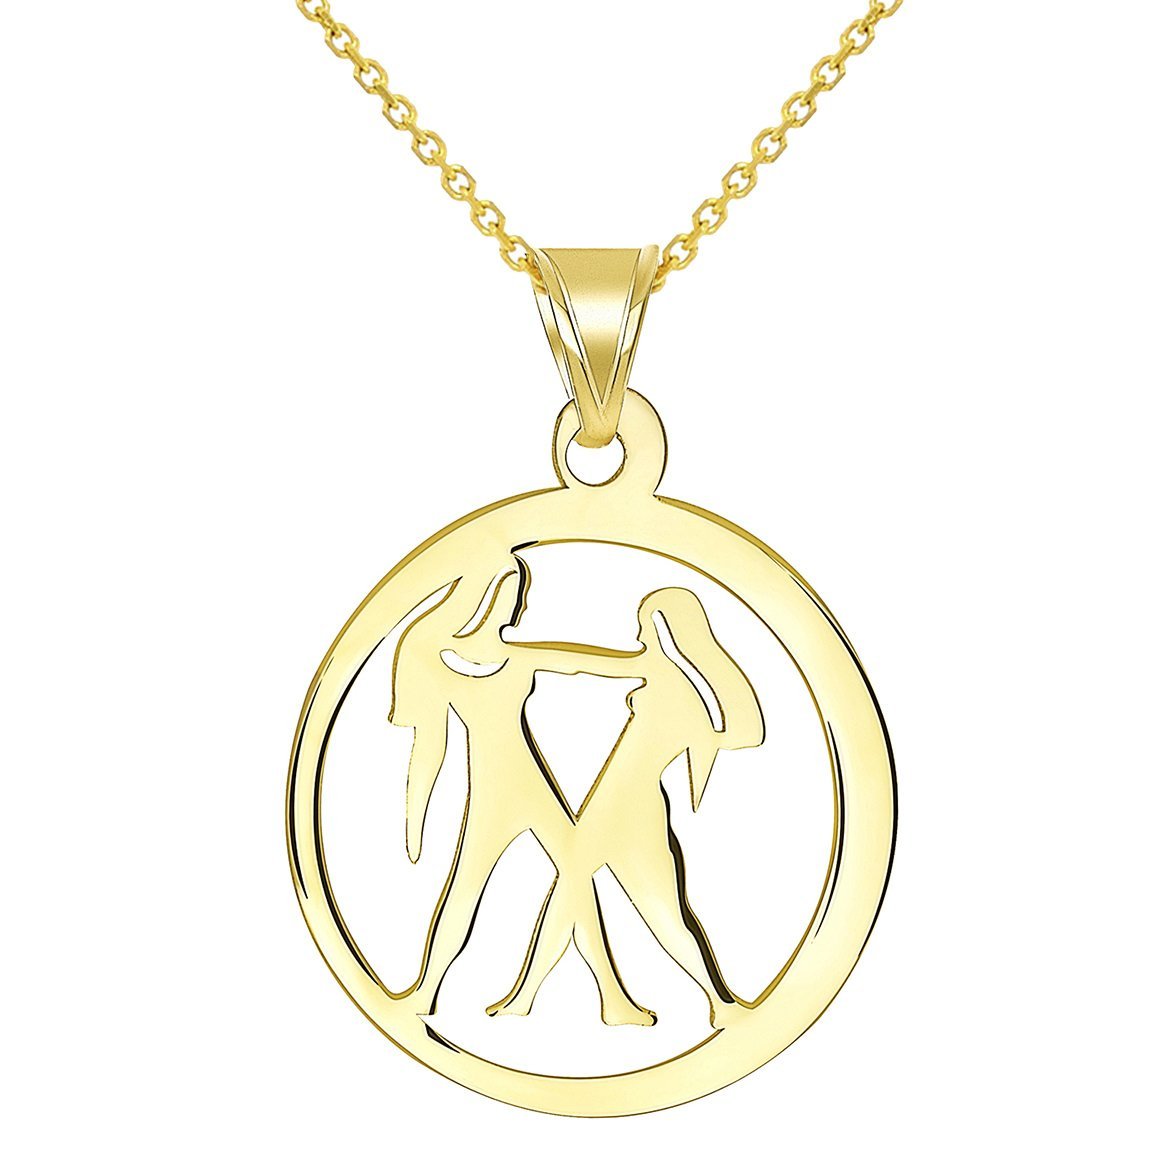 14k Yellow Gold Dainty Round Gemini Twins Zodiac Sign Cut-Out Disc Pendant Necklace